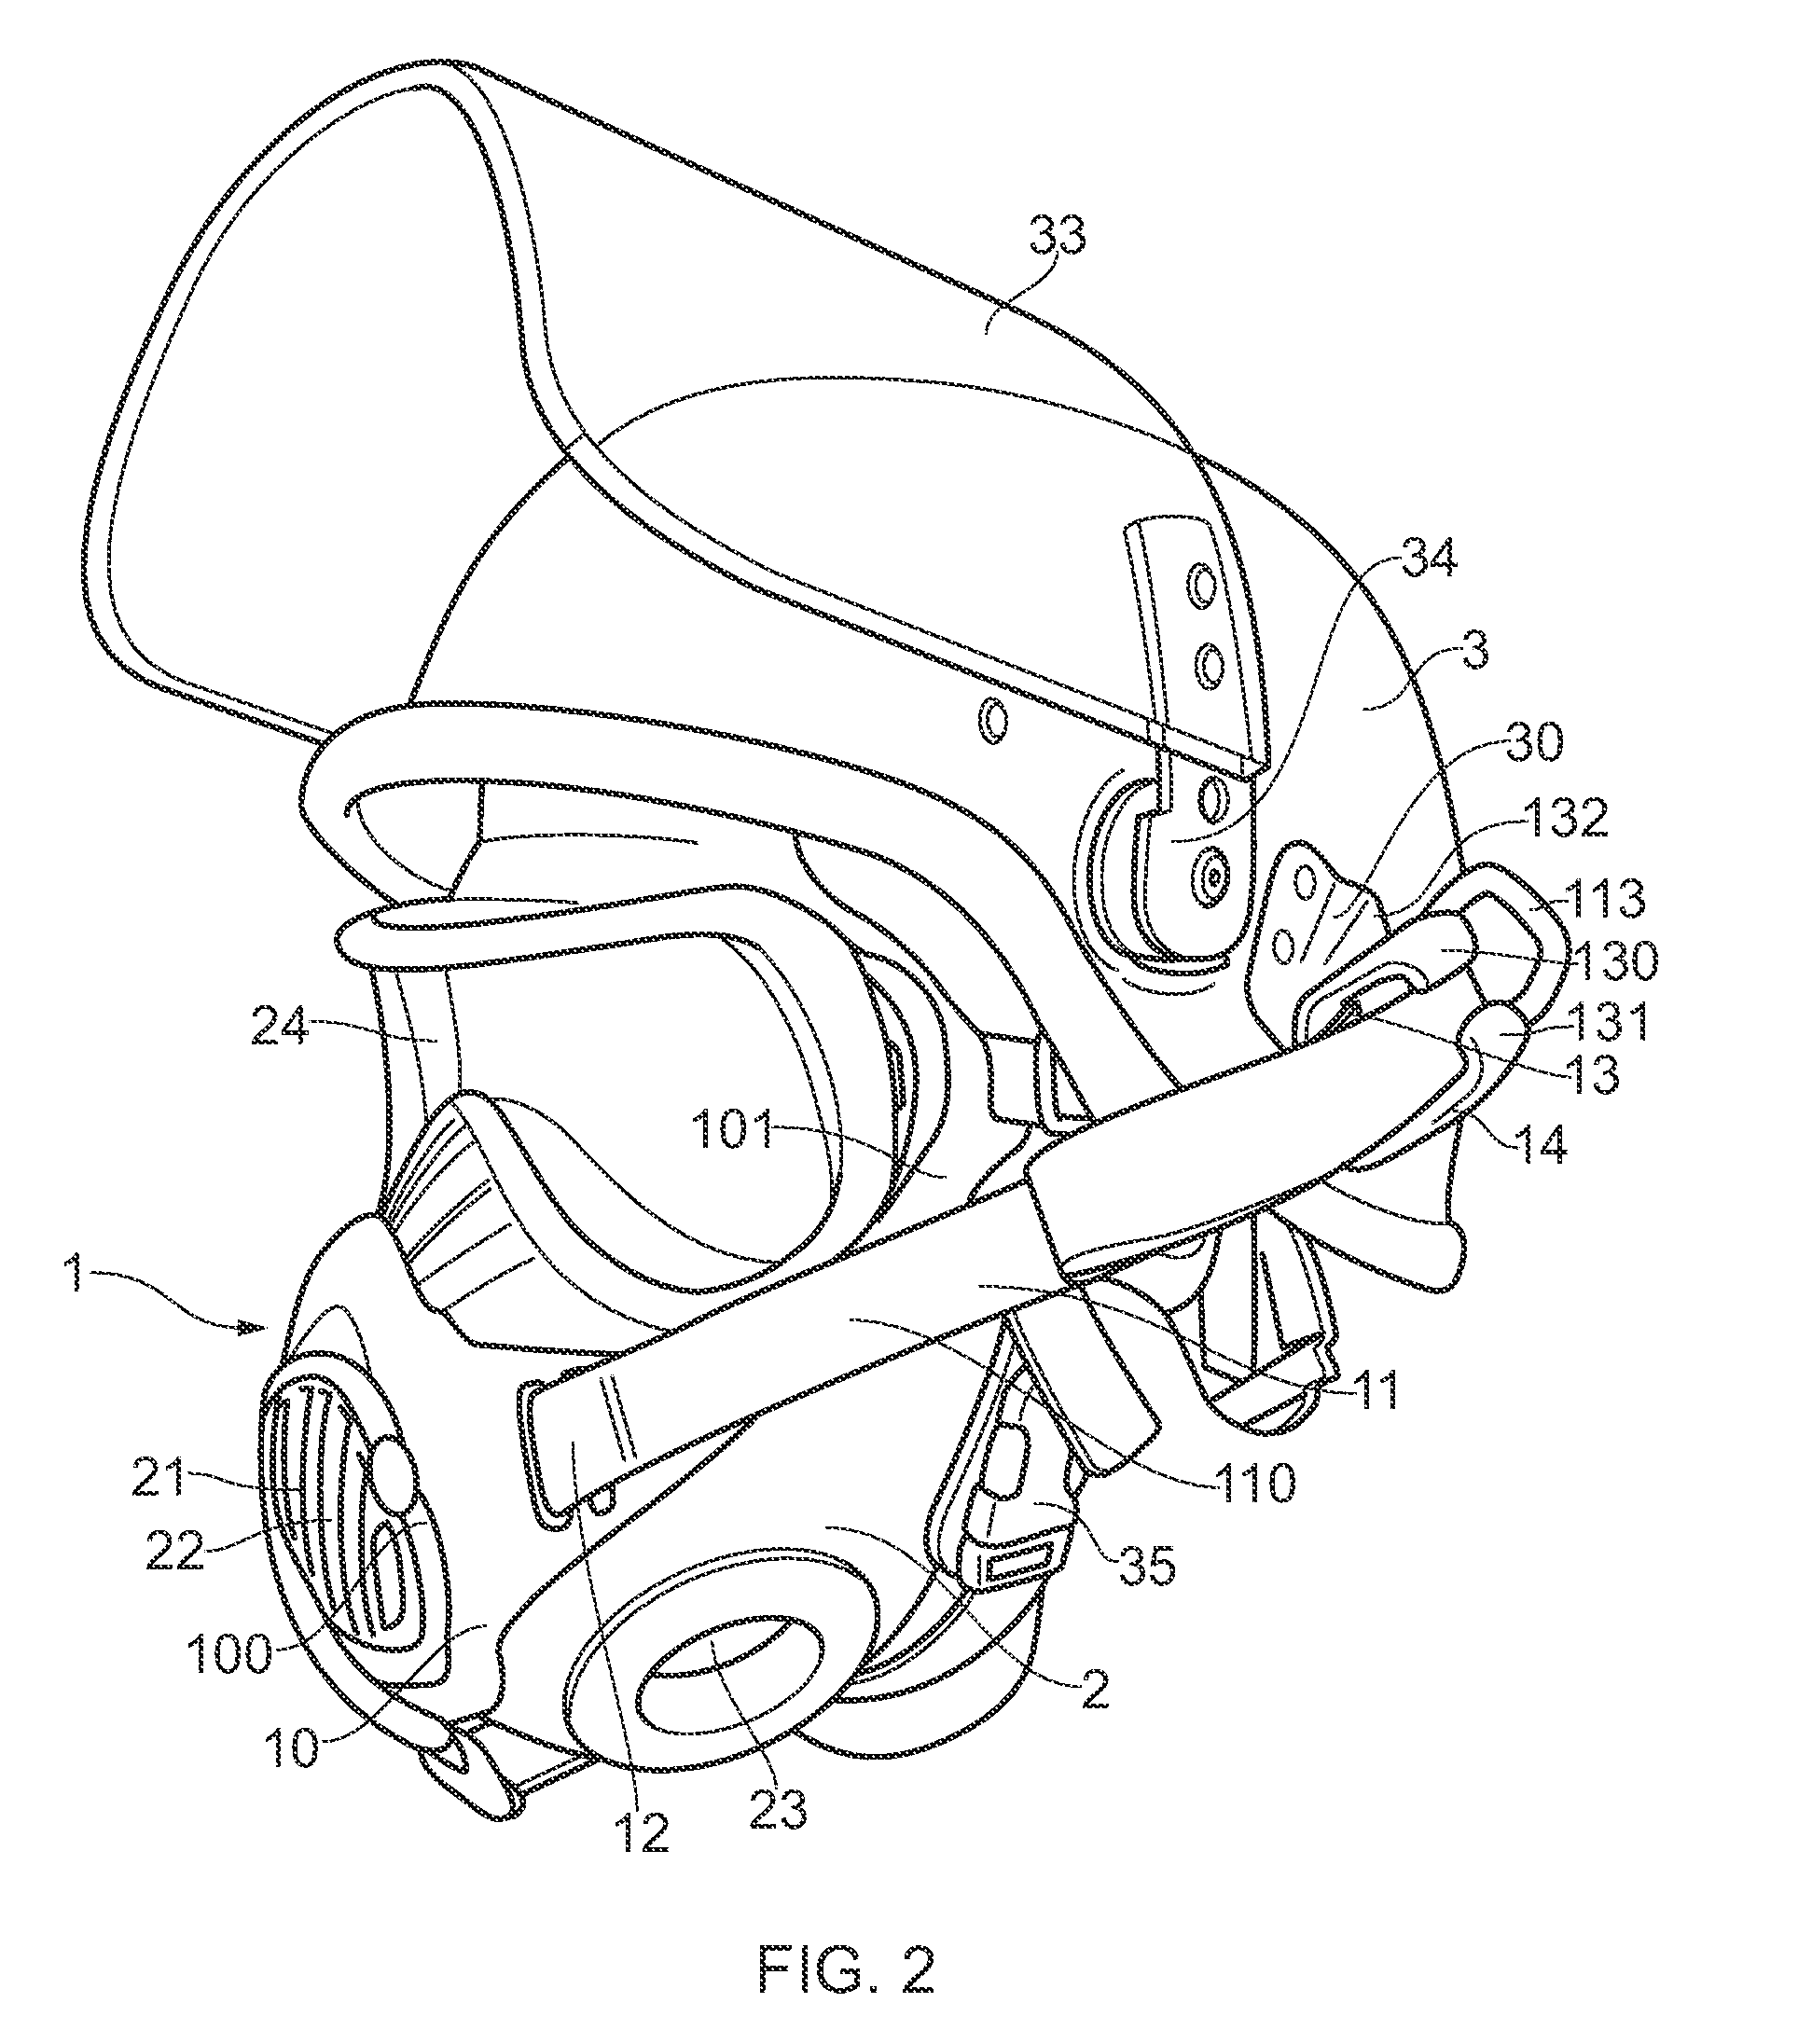 Mask securing device